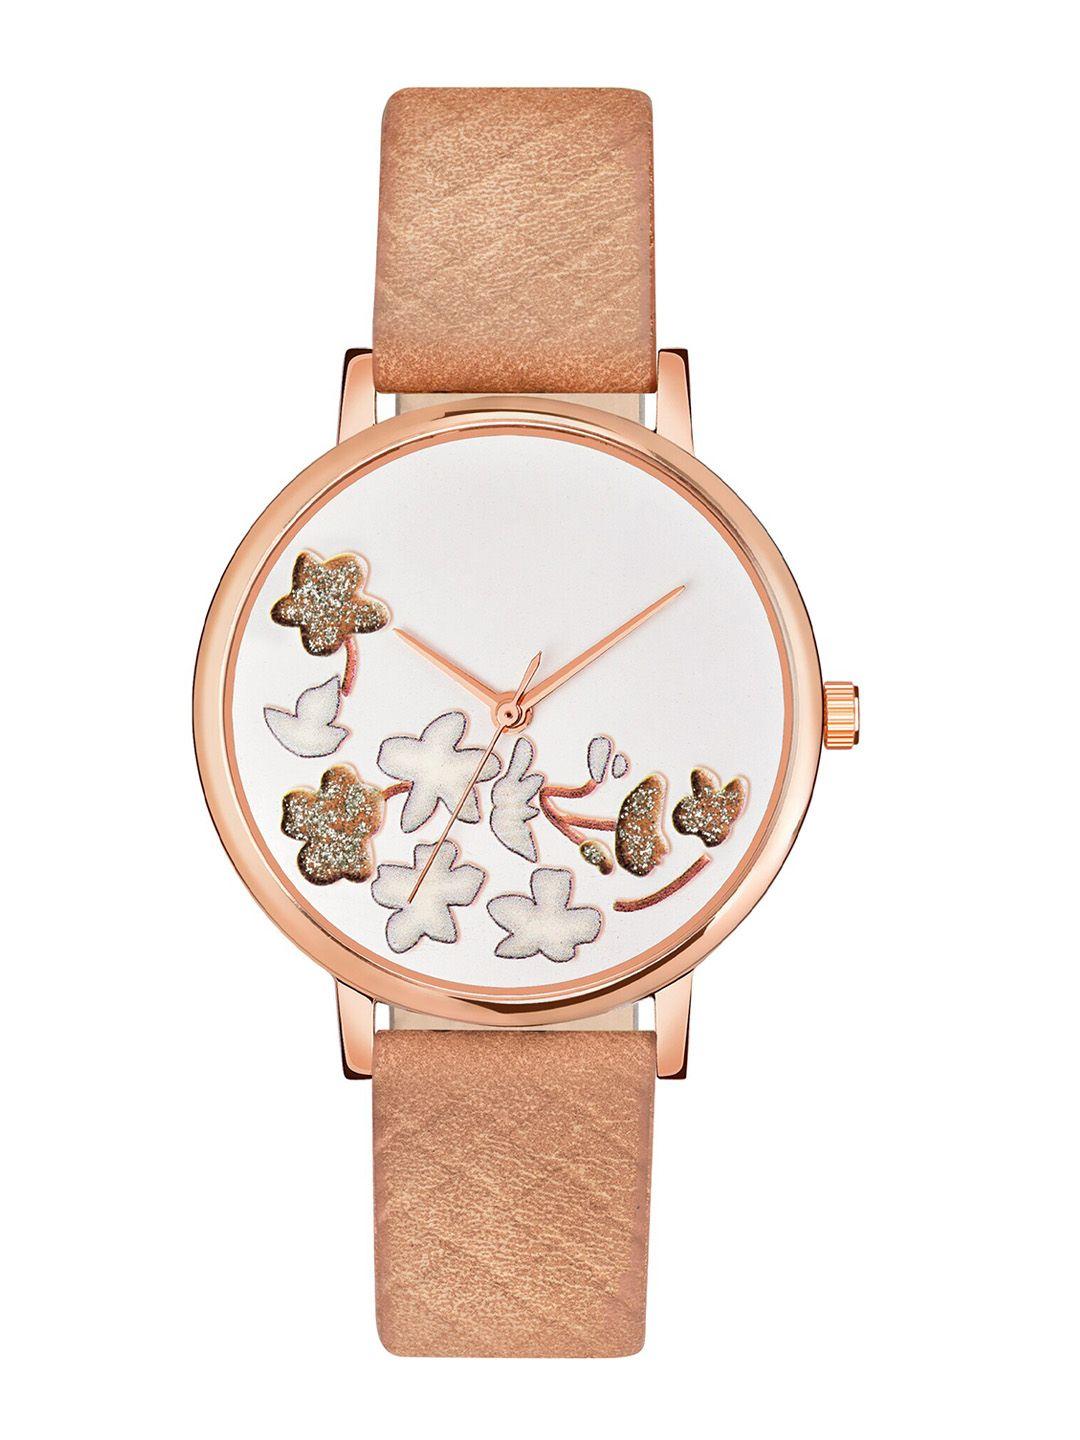 shocknshop-women-white-embellished-dial-&-brown-leather-straps-analogue-watch-mt504